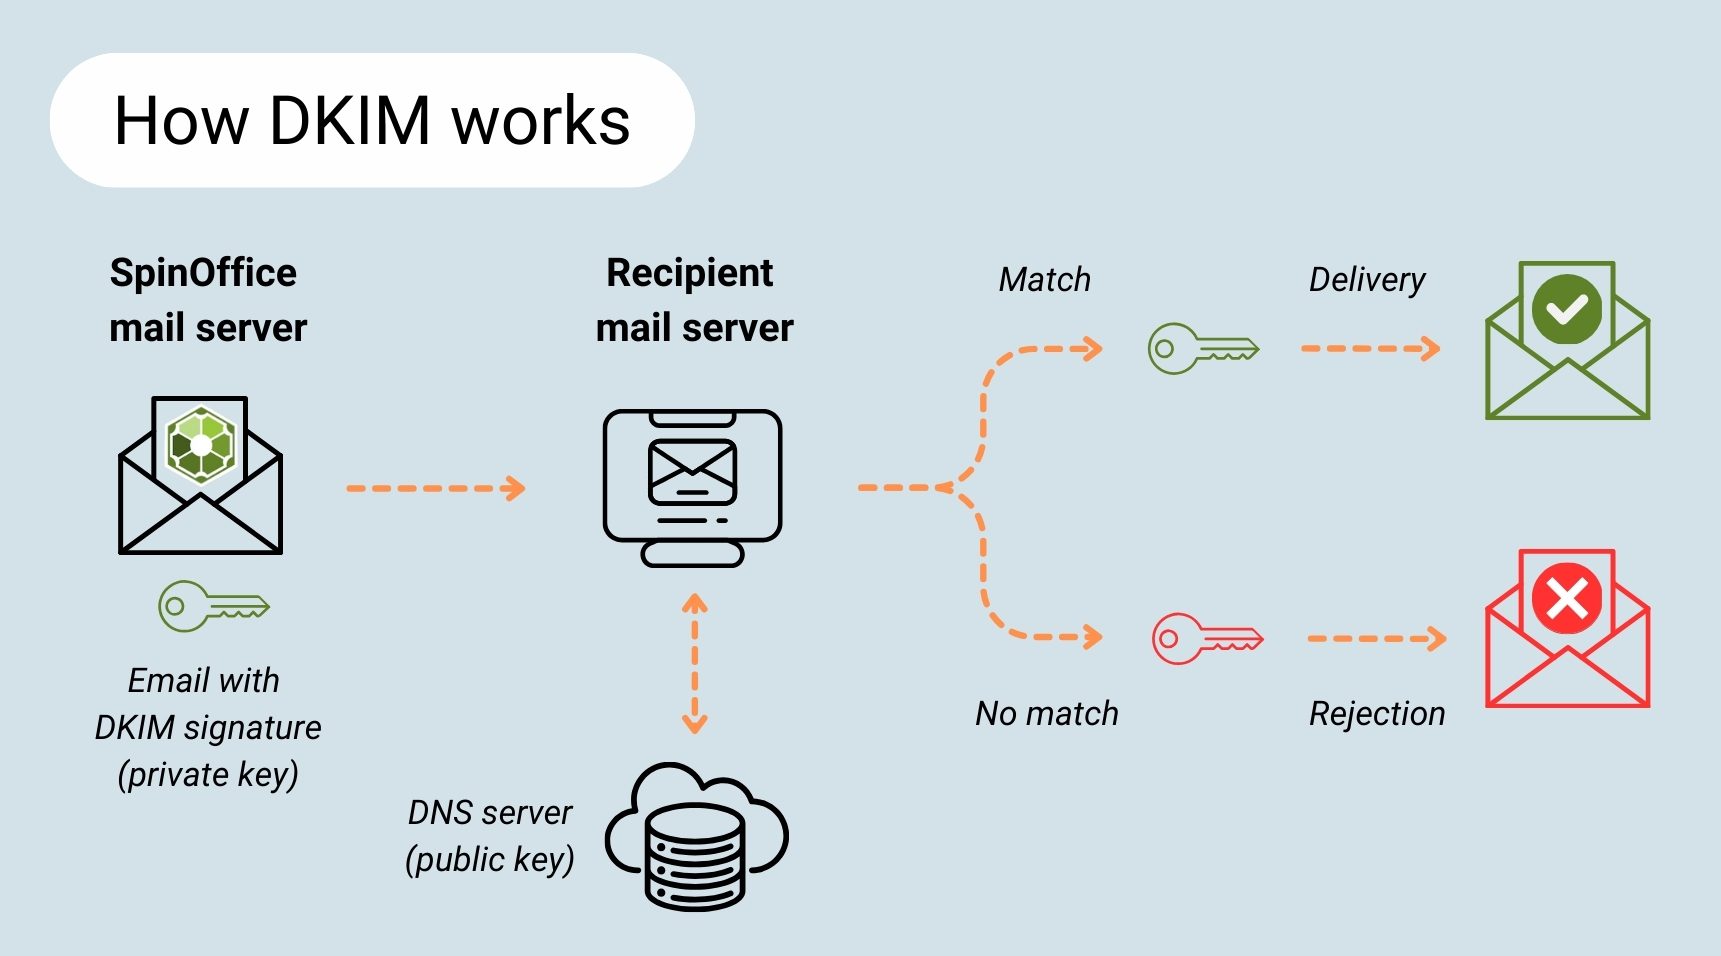 Email Domain Authentication standard DKIM now possible for SpinOffice